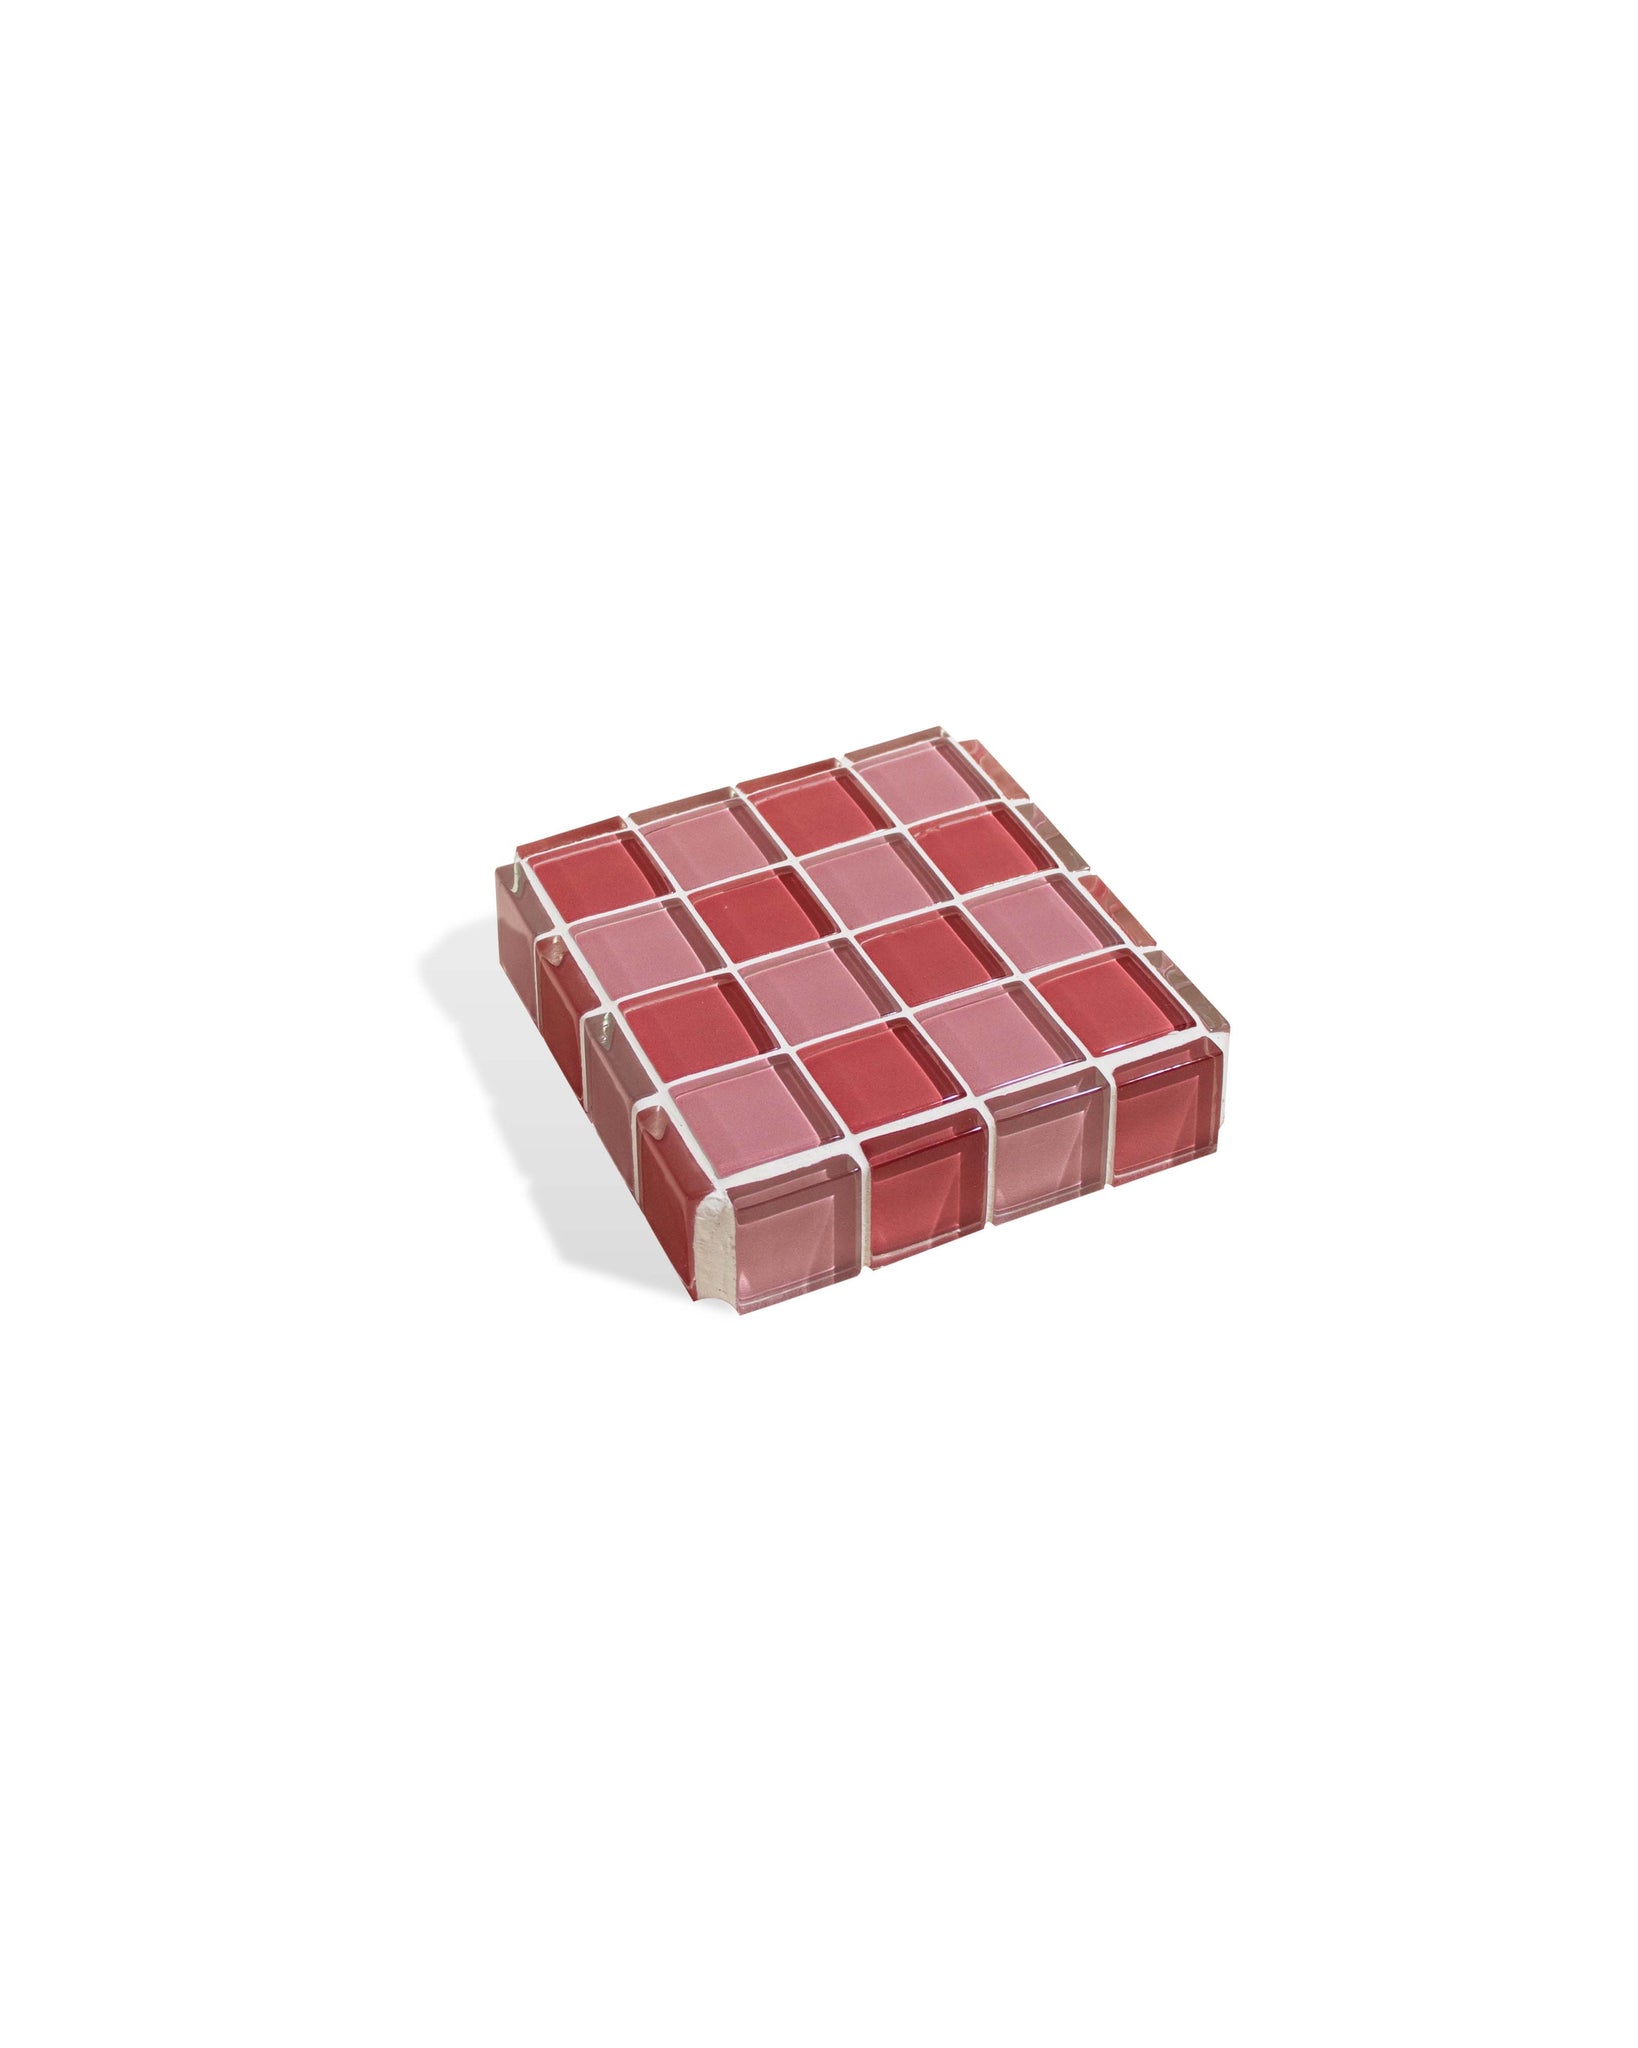 GLASS TILE CUBE - Cotton Candy